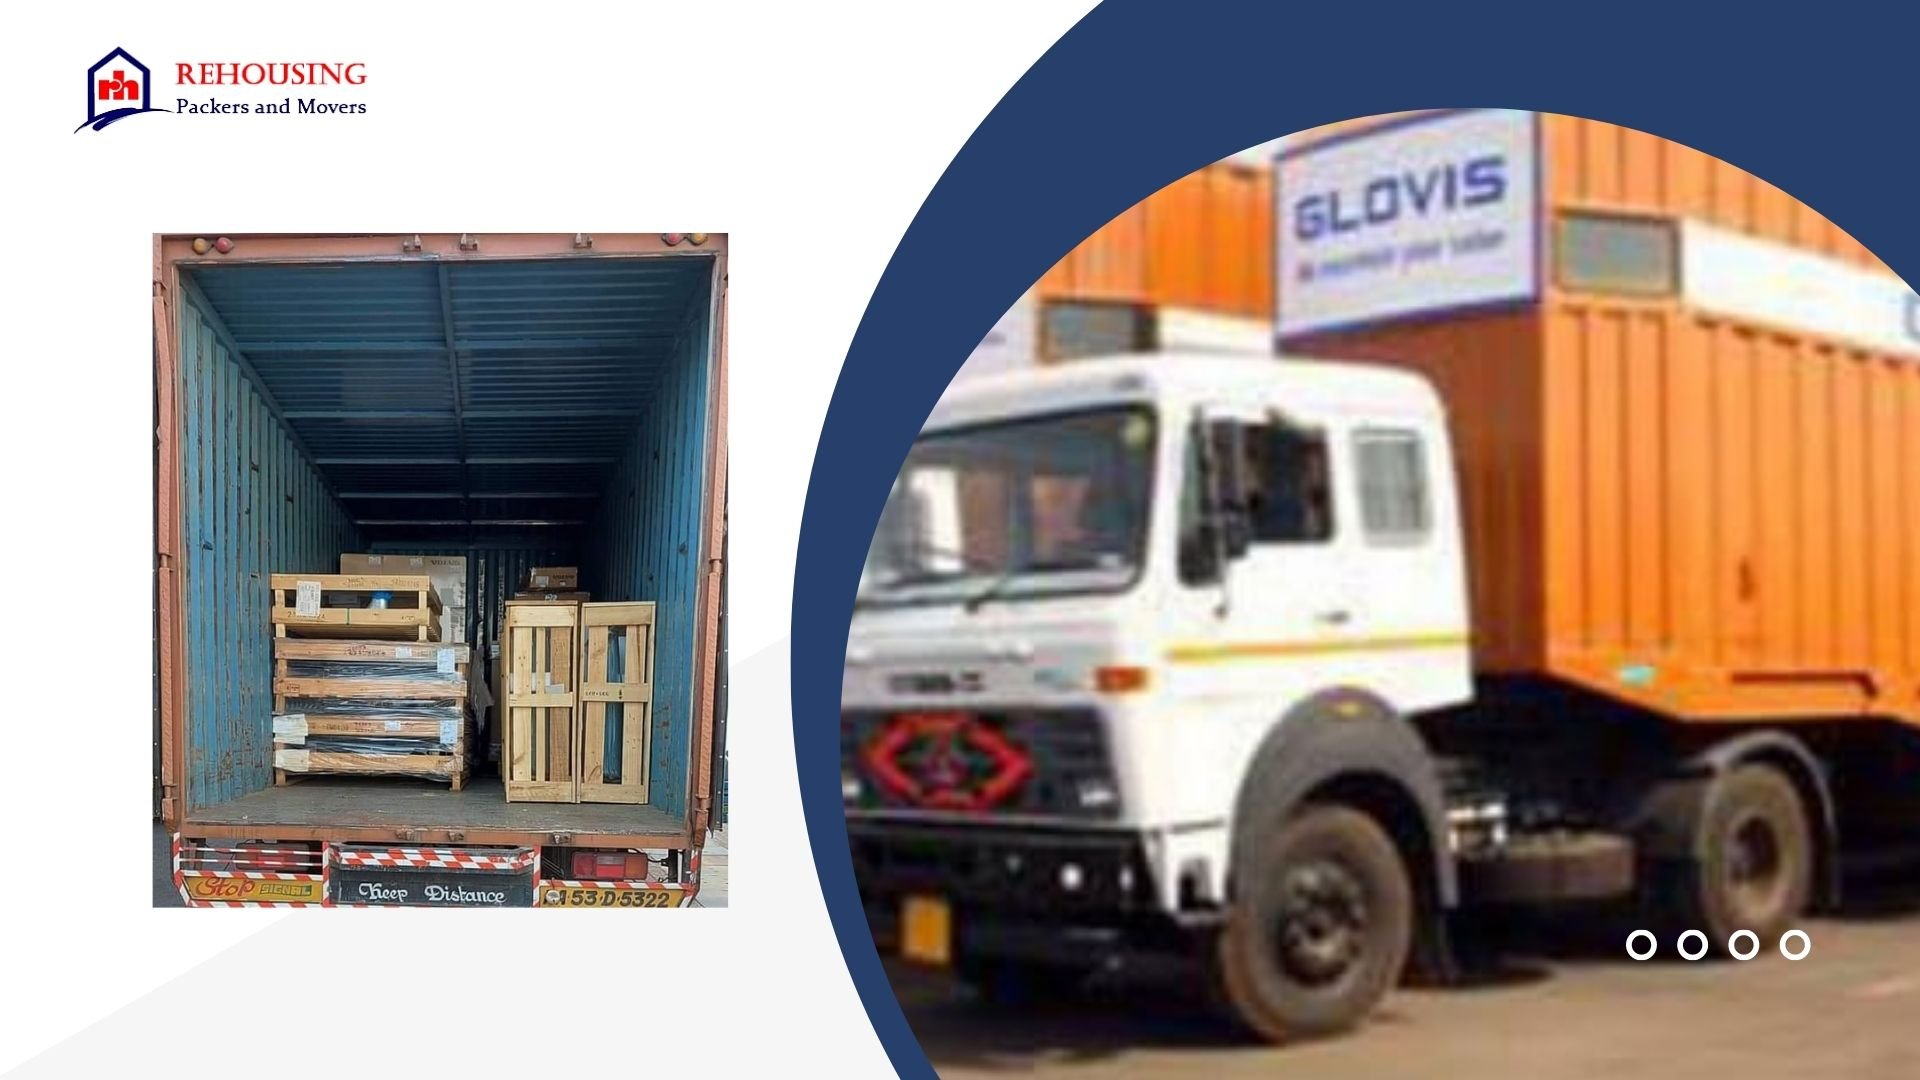 Packers and Movers From Dehradun to Kolkata | Rehousing packers and movers